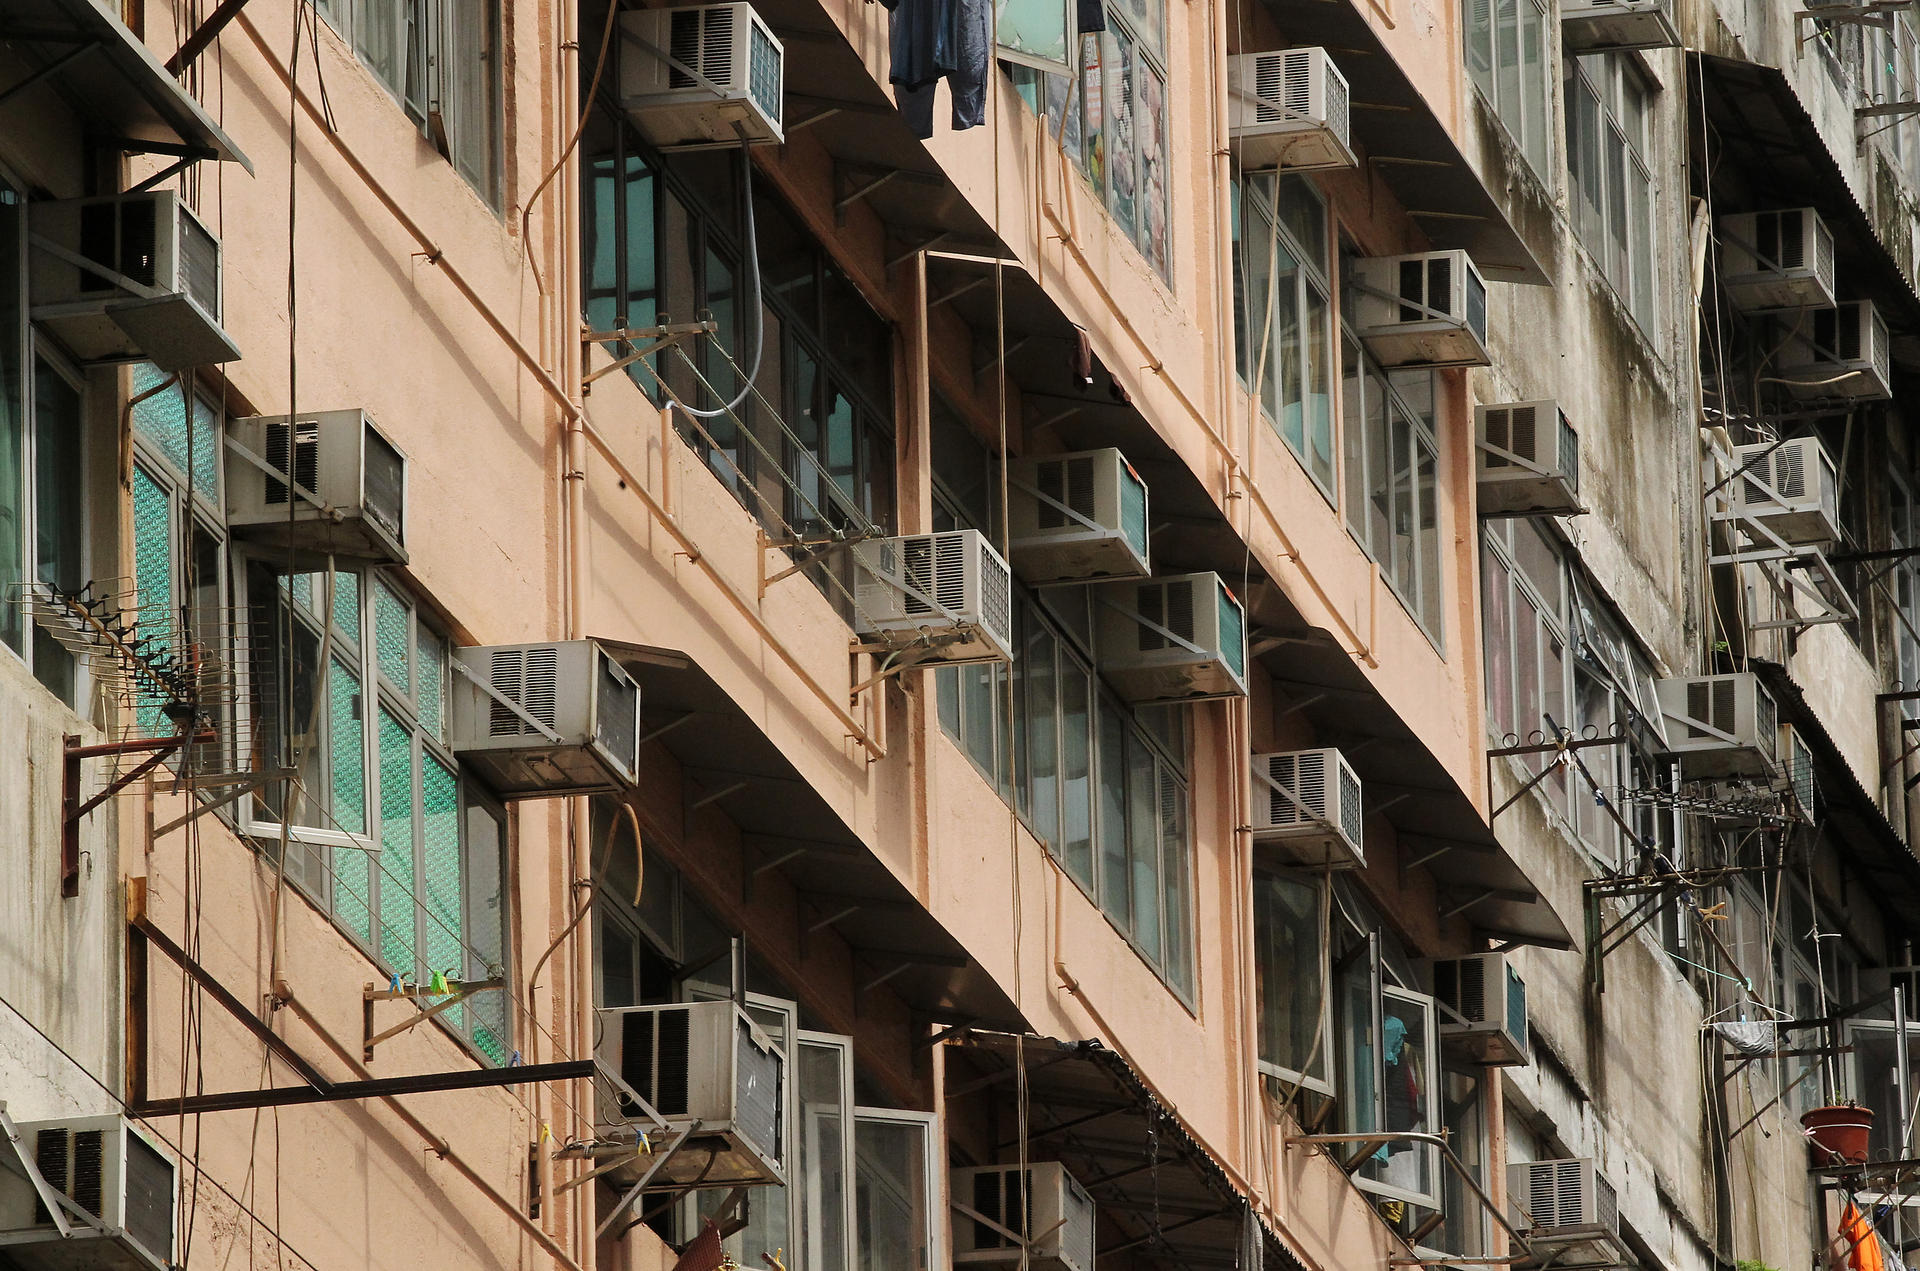 Air-conditioners provide needed comfort in Hong Kong's concrete jungle, but can drip on pedestrians below. Photo: K. Y. Cheng